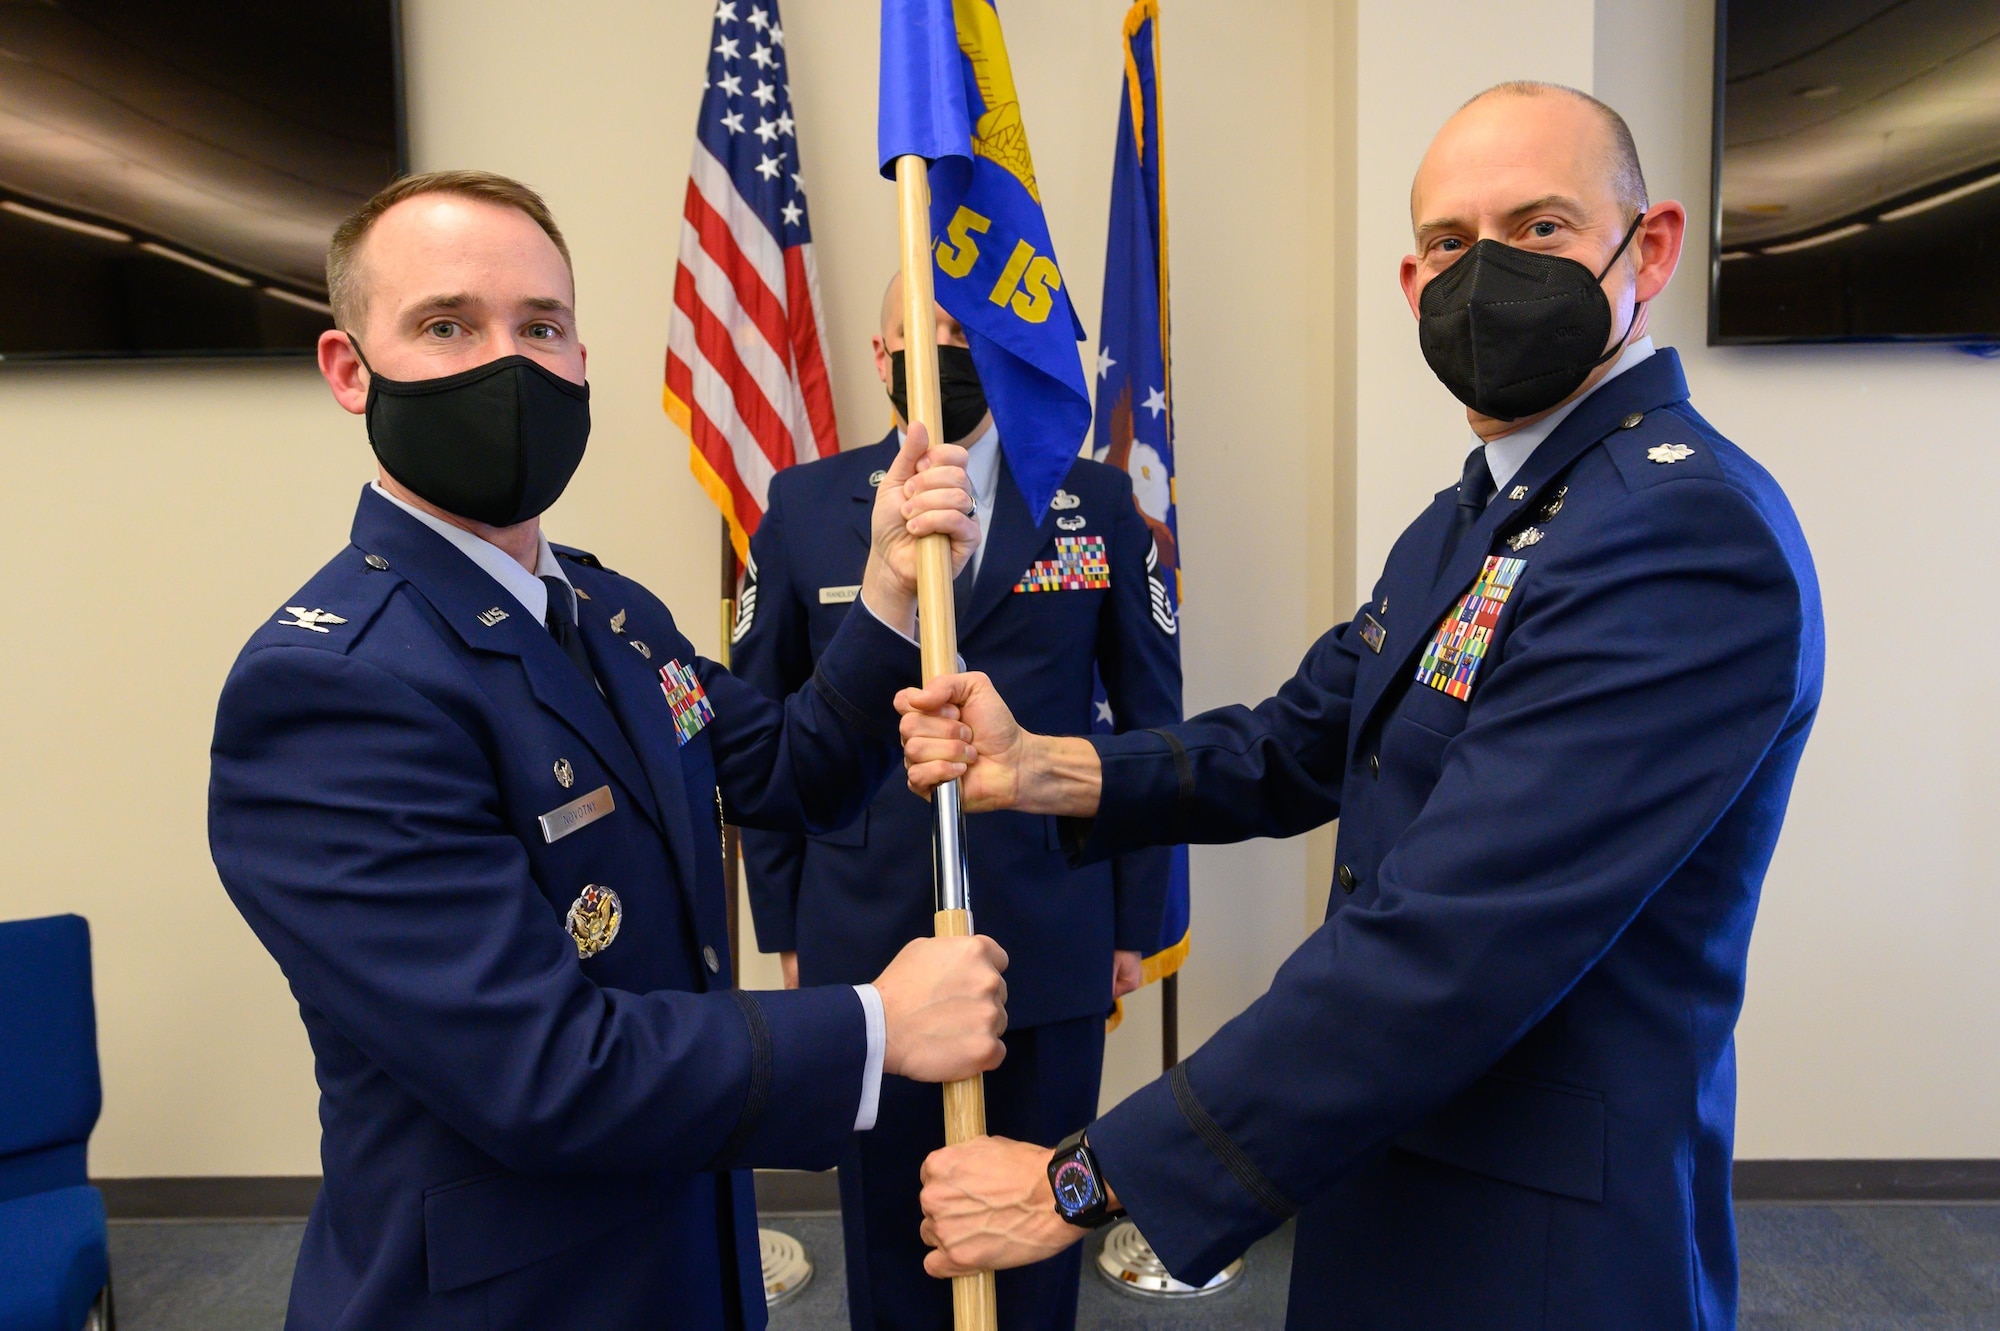 (From left) Air Force Col. Reid Novotny, the commander for the 175th Cyber Operations Group, recieves the 135th Intelligence Squadron guidon from U.S. Air Force Lt. Col. Jason R. Barrass, outgoing 135th IS commander, Feb. 12, 2022, during a change of command ceremony for the 135th IS at Warfield Air National Guard Base at Martin State Airport, Middle River, Maryland. The passing of the guidon symbolizes the passing of command from one service member to another. (U.S. Air National Guard photo by Staff Sgt. Sarah M. McClanahan)